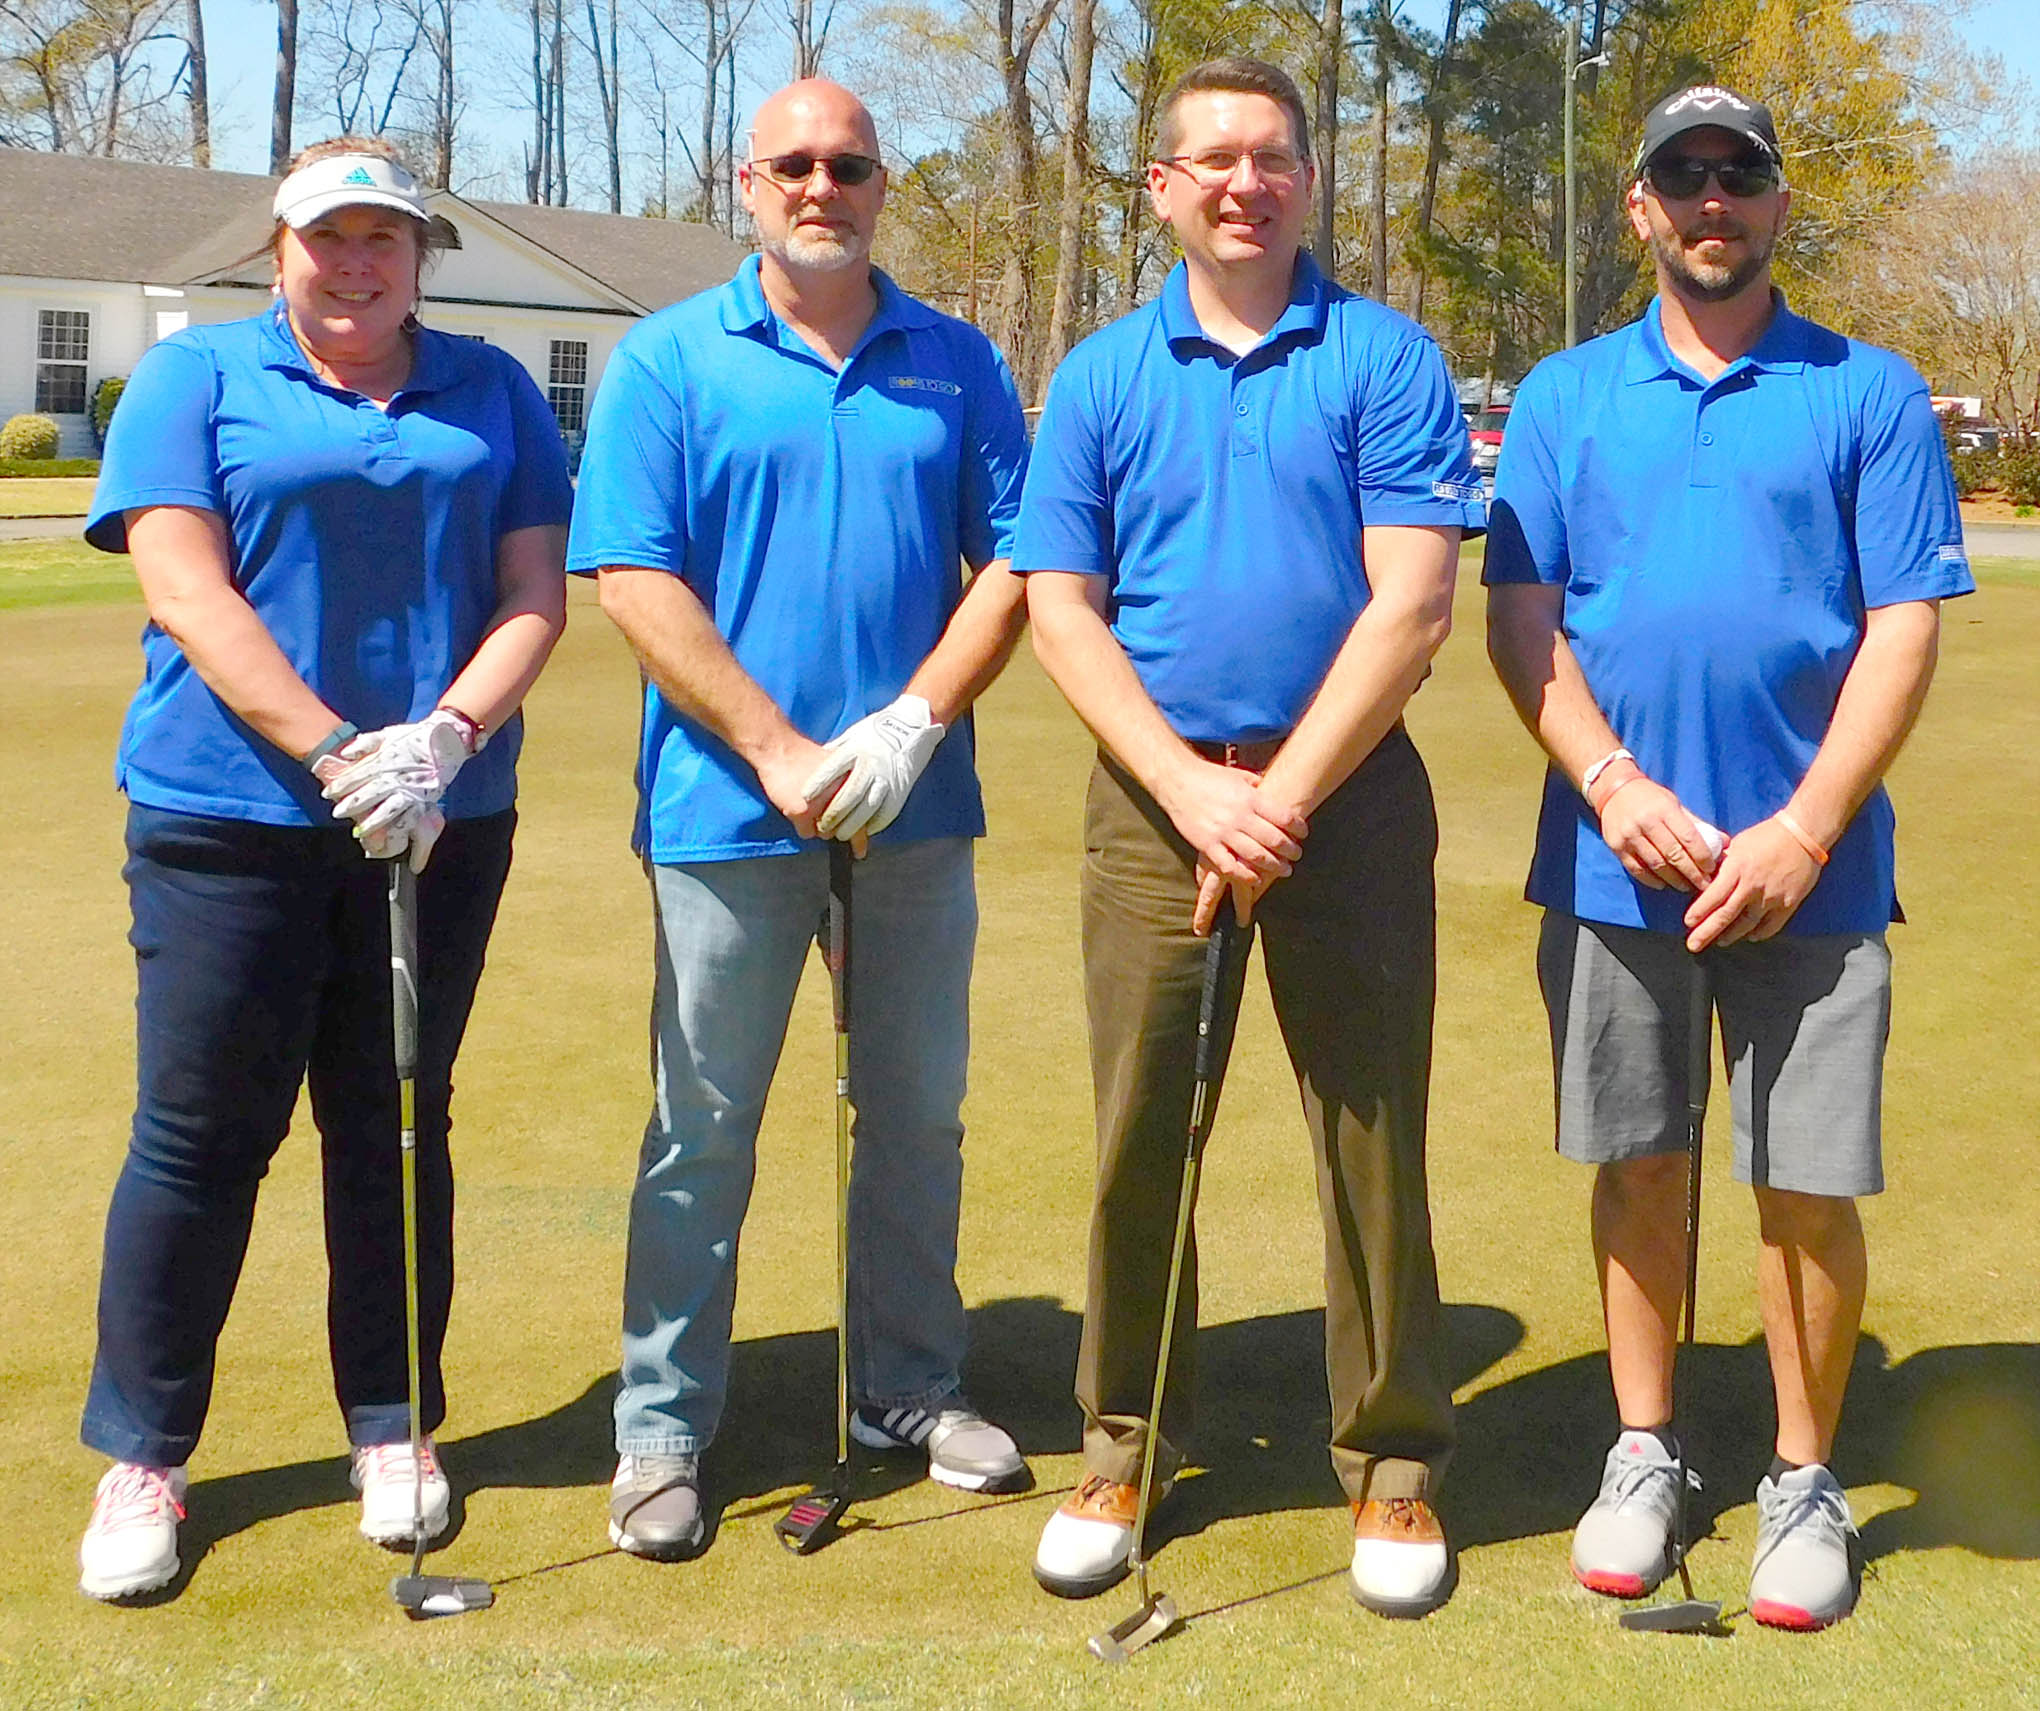 Click to enlarge,  Members of the second flight third-place team in the sixth Central Carolina Community College Foundation Harnett Golf Classic were Caroline Rary, Steve Cook, Tyler Taylor, and Paul Piatkowski. For information about the Foundation, donating to it, establishing a scholarship, or other fund-raising events, contact Dr. Emily Hare, Executive Director of the CCCC Foundation, 919-718-7230. Information is also available at the CCCC Foundation website, www.cccc.edu/foundation. 